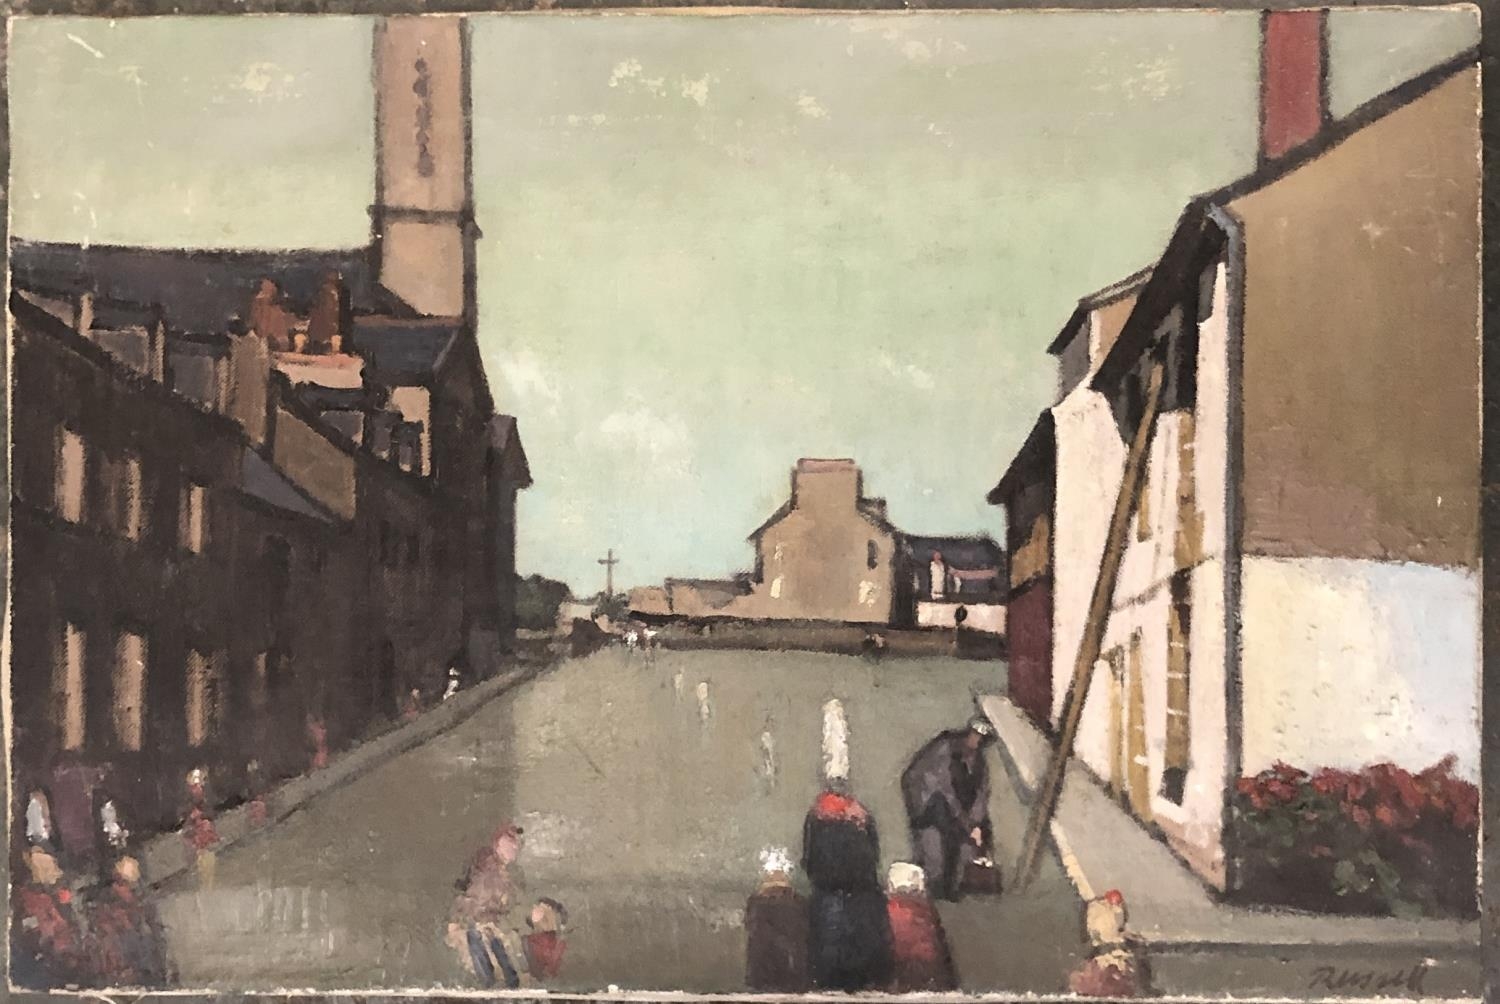 Rodney Fryer Russell (1918-1996), two street scenes, oils on canvas, 42x70cm and 41x61cm (2) - Image 2 of 2